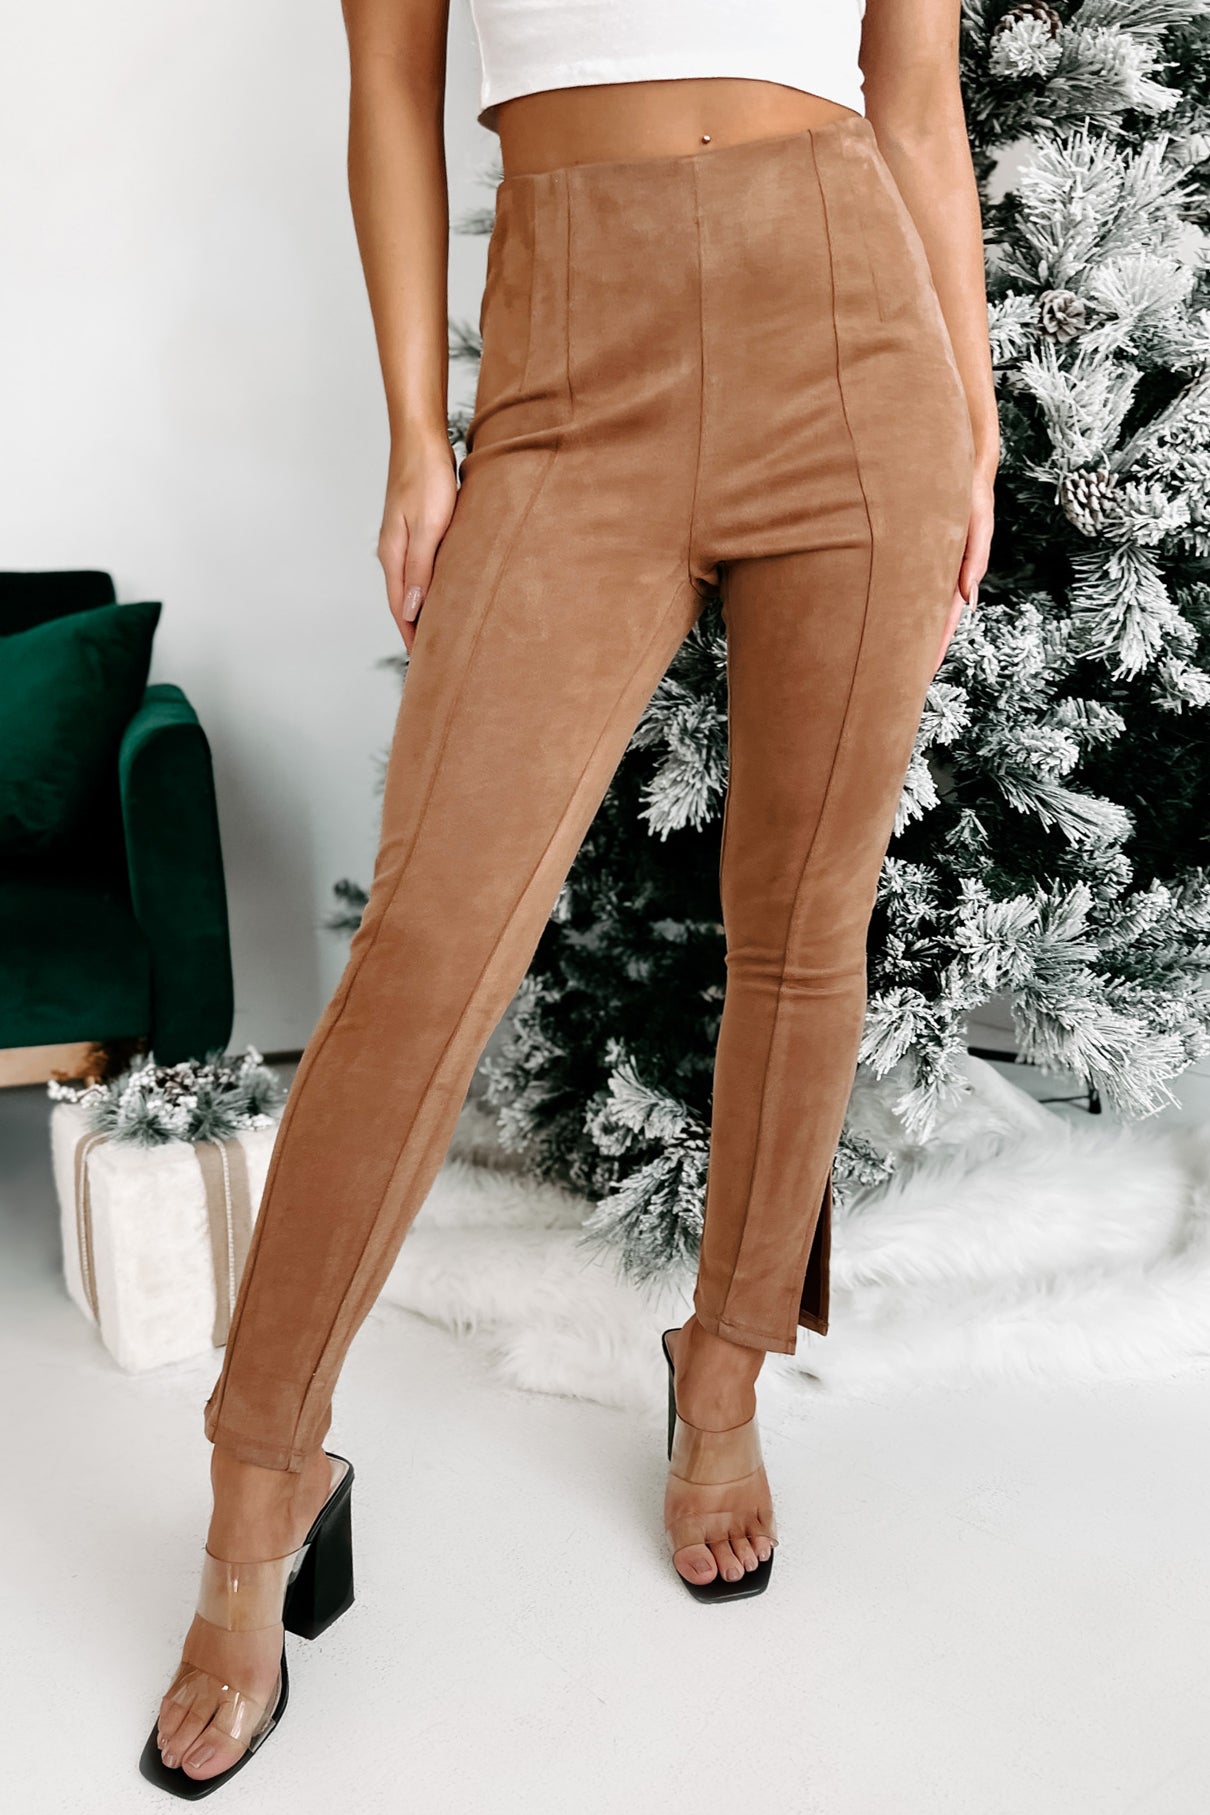 See and Be Seam High-Waisted Faux Leather Pants  Cream pants outfit,  Latest fashion clothes, White leather pants